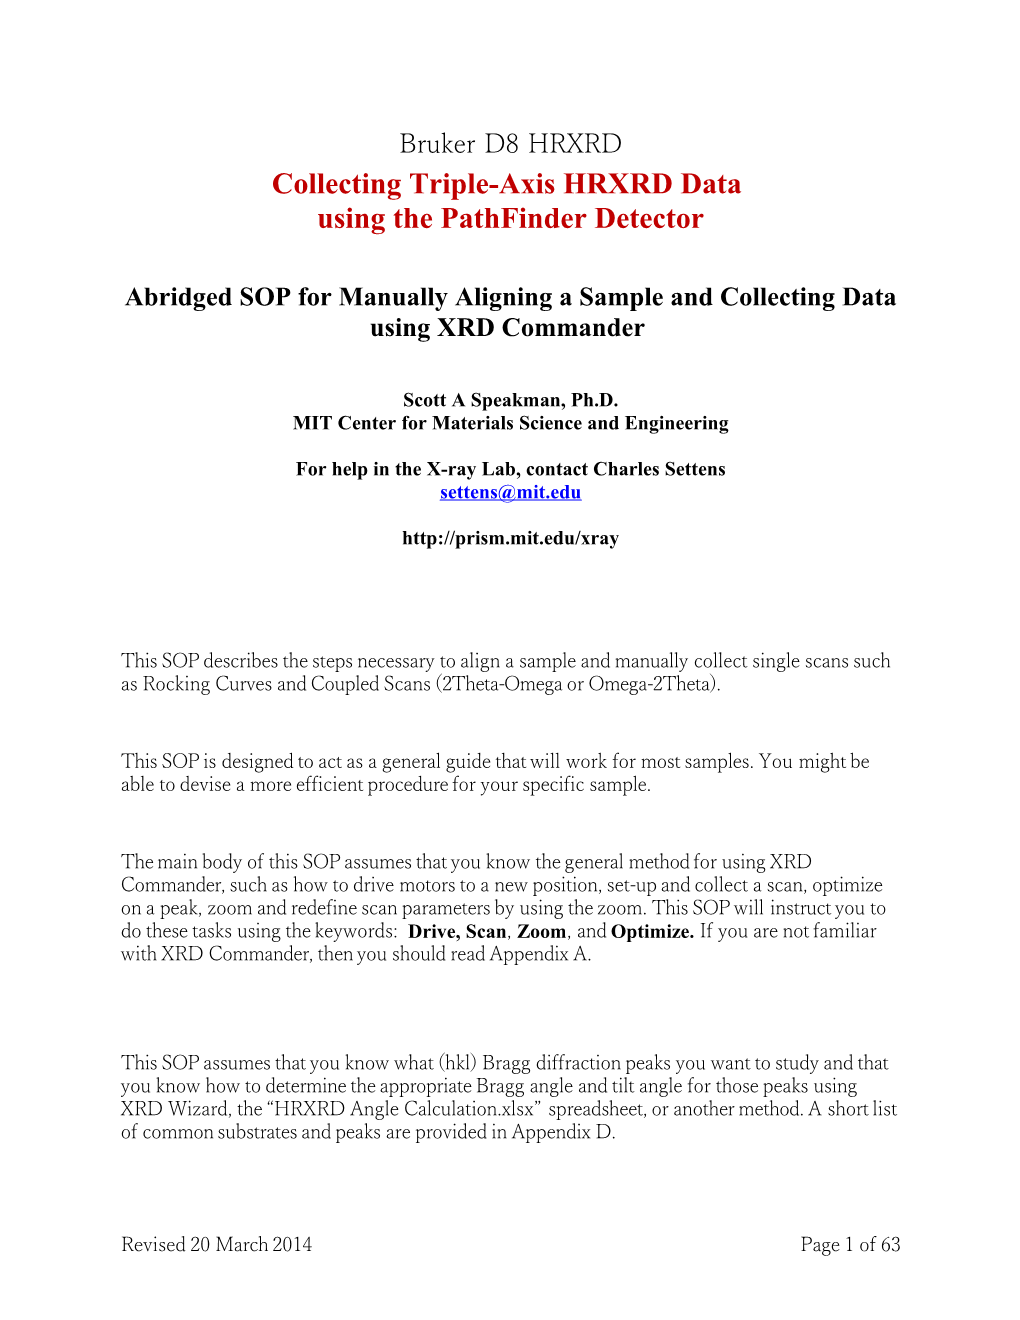 Collecting Triple-Axis HRXRD Data